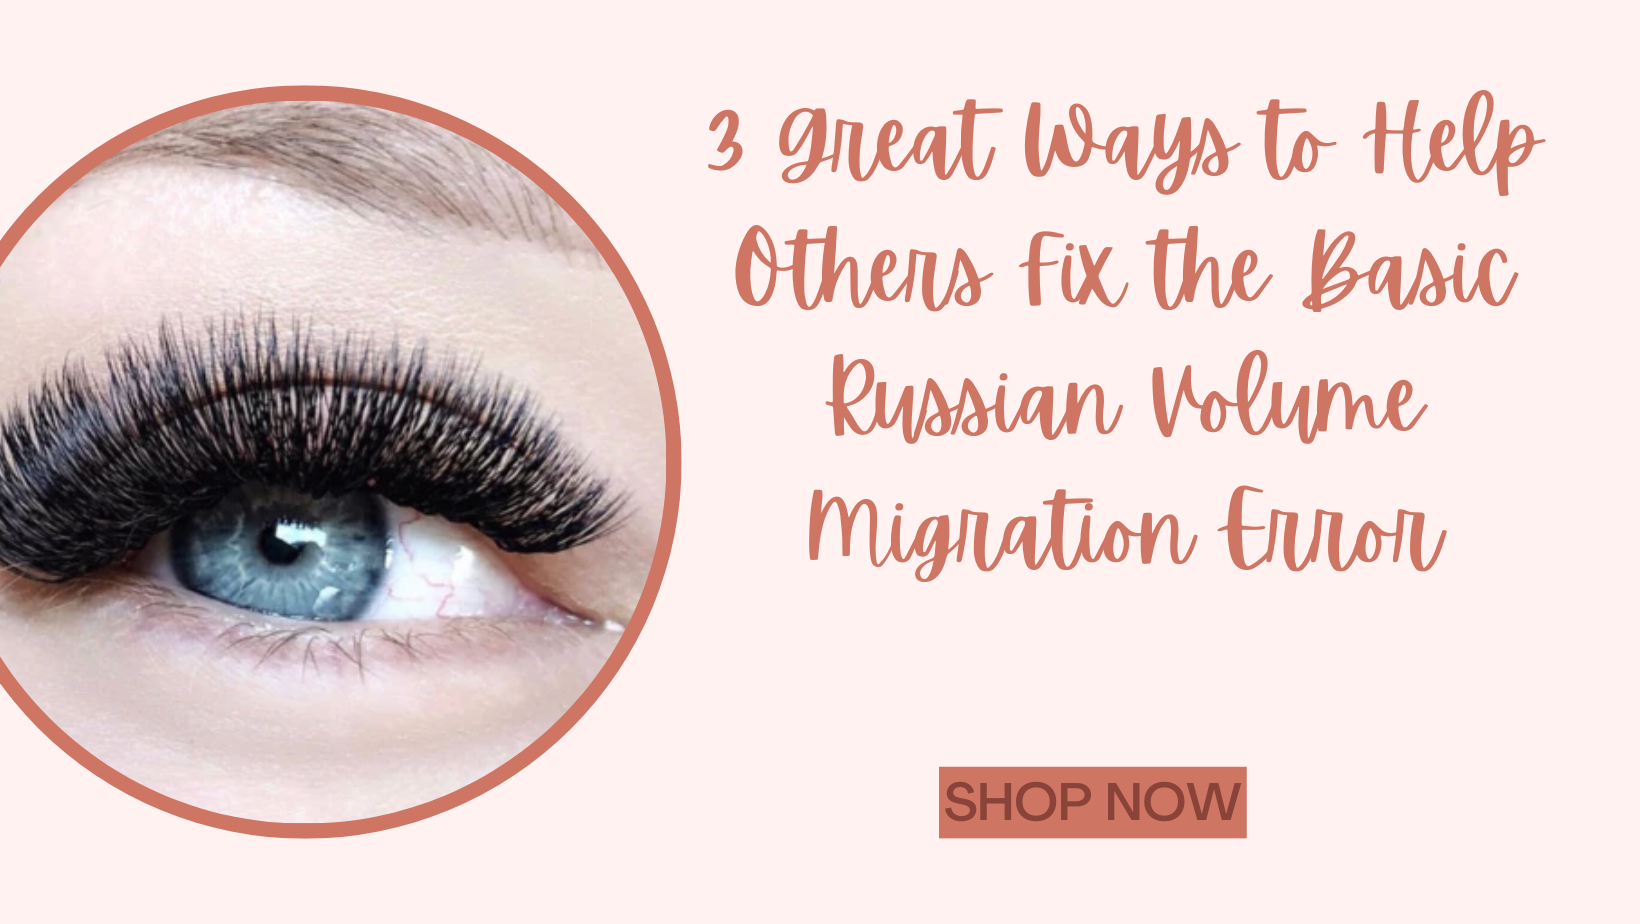 3 Great Ways to Help Others Fix the Basic Russian Volume Migration Error